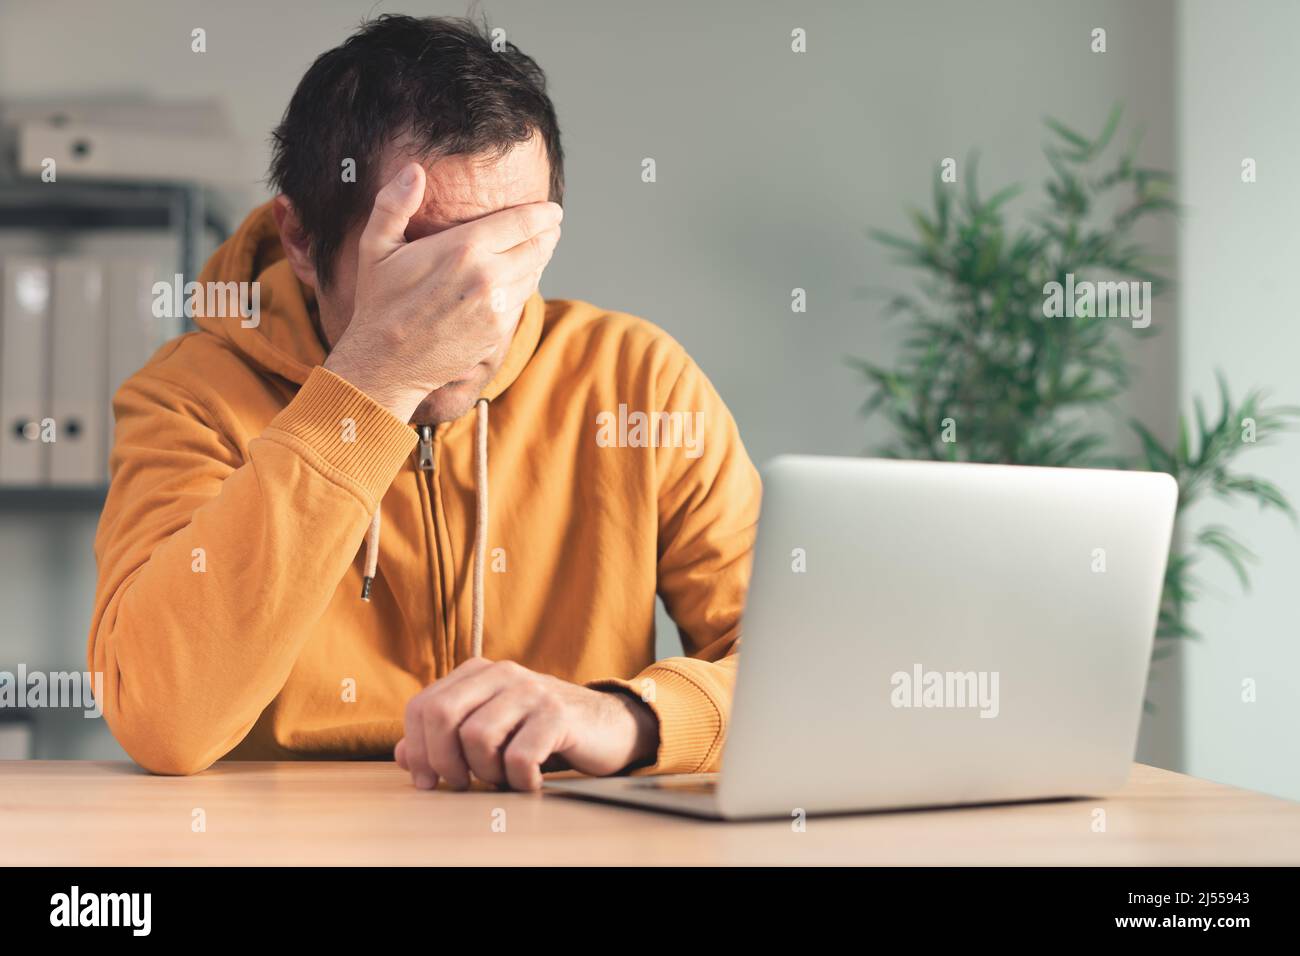 Disappointed freelancer at home office desk covering face with hand in front of laptop computer. Job problems and professional hardship concept. Stock Photo